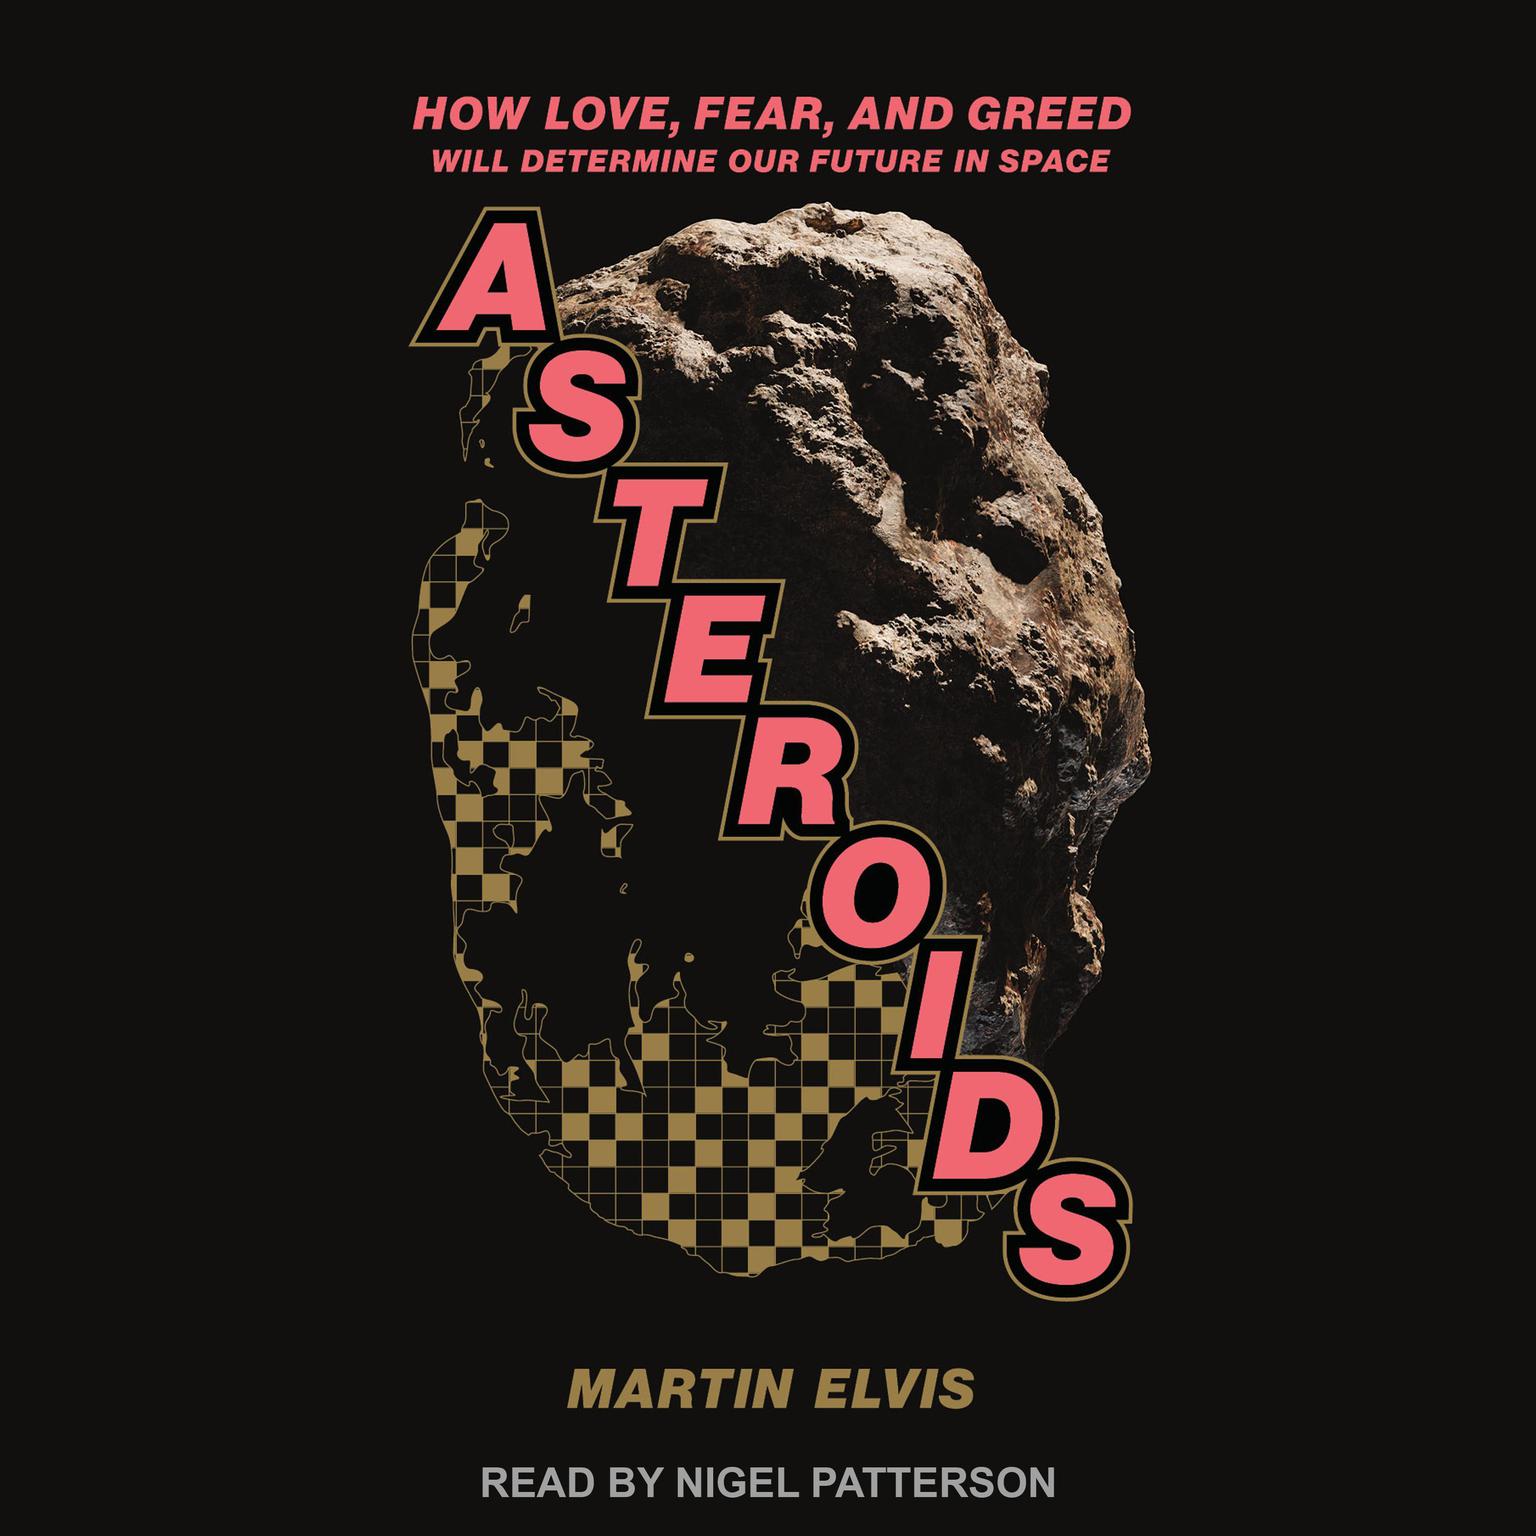 Asteroids: How Love, Fear, and Greed Will Determine Our Future in Space Audiobook, by Martin Elvis